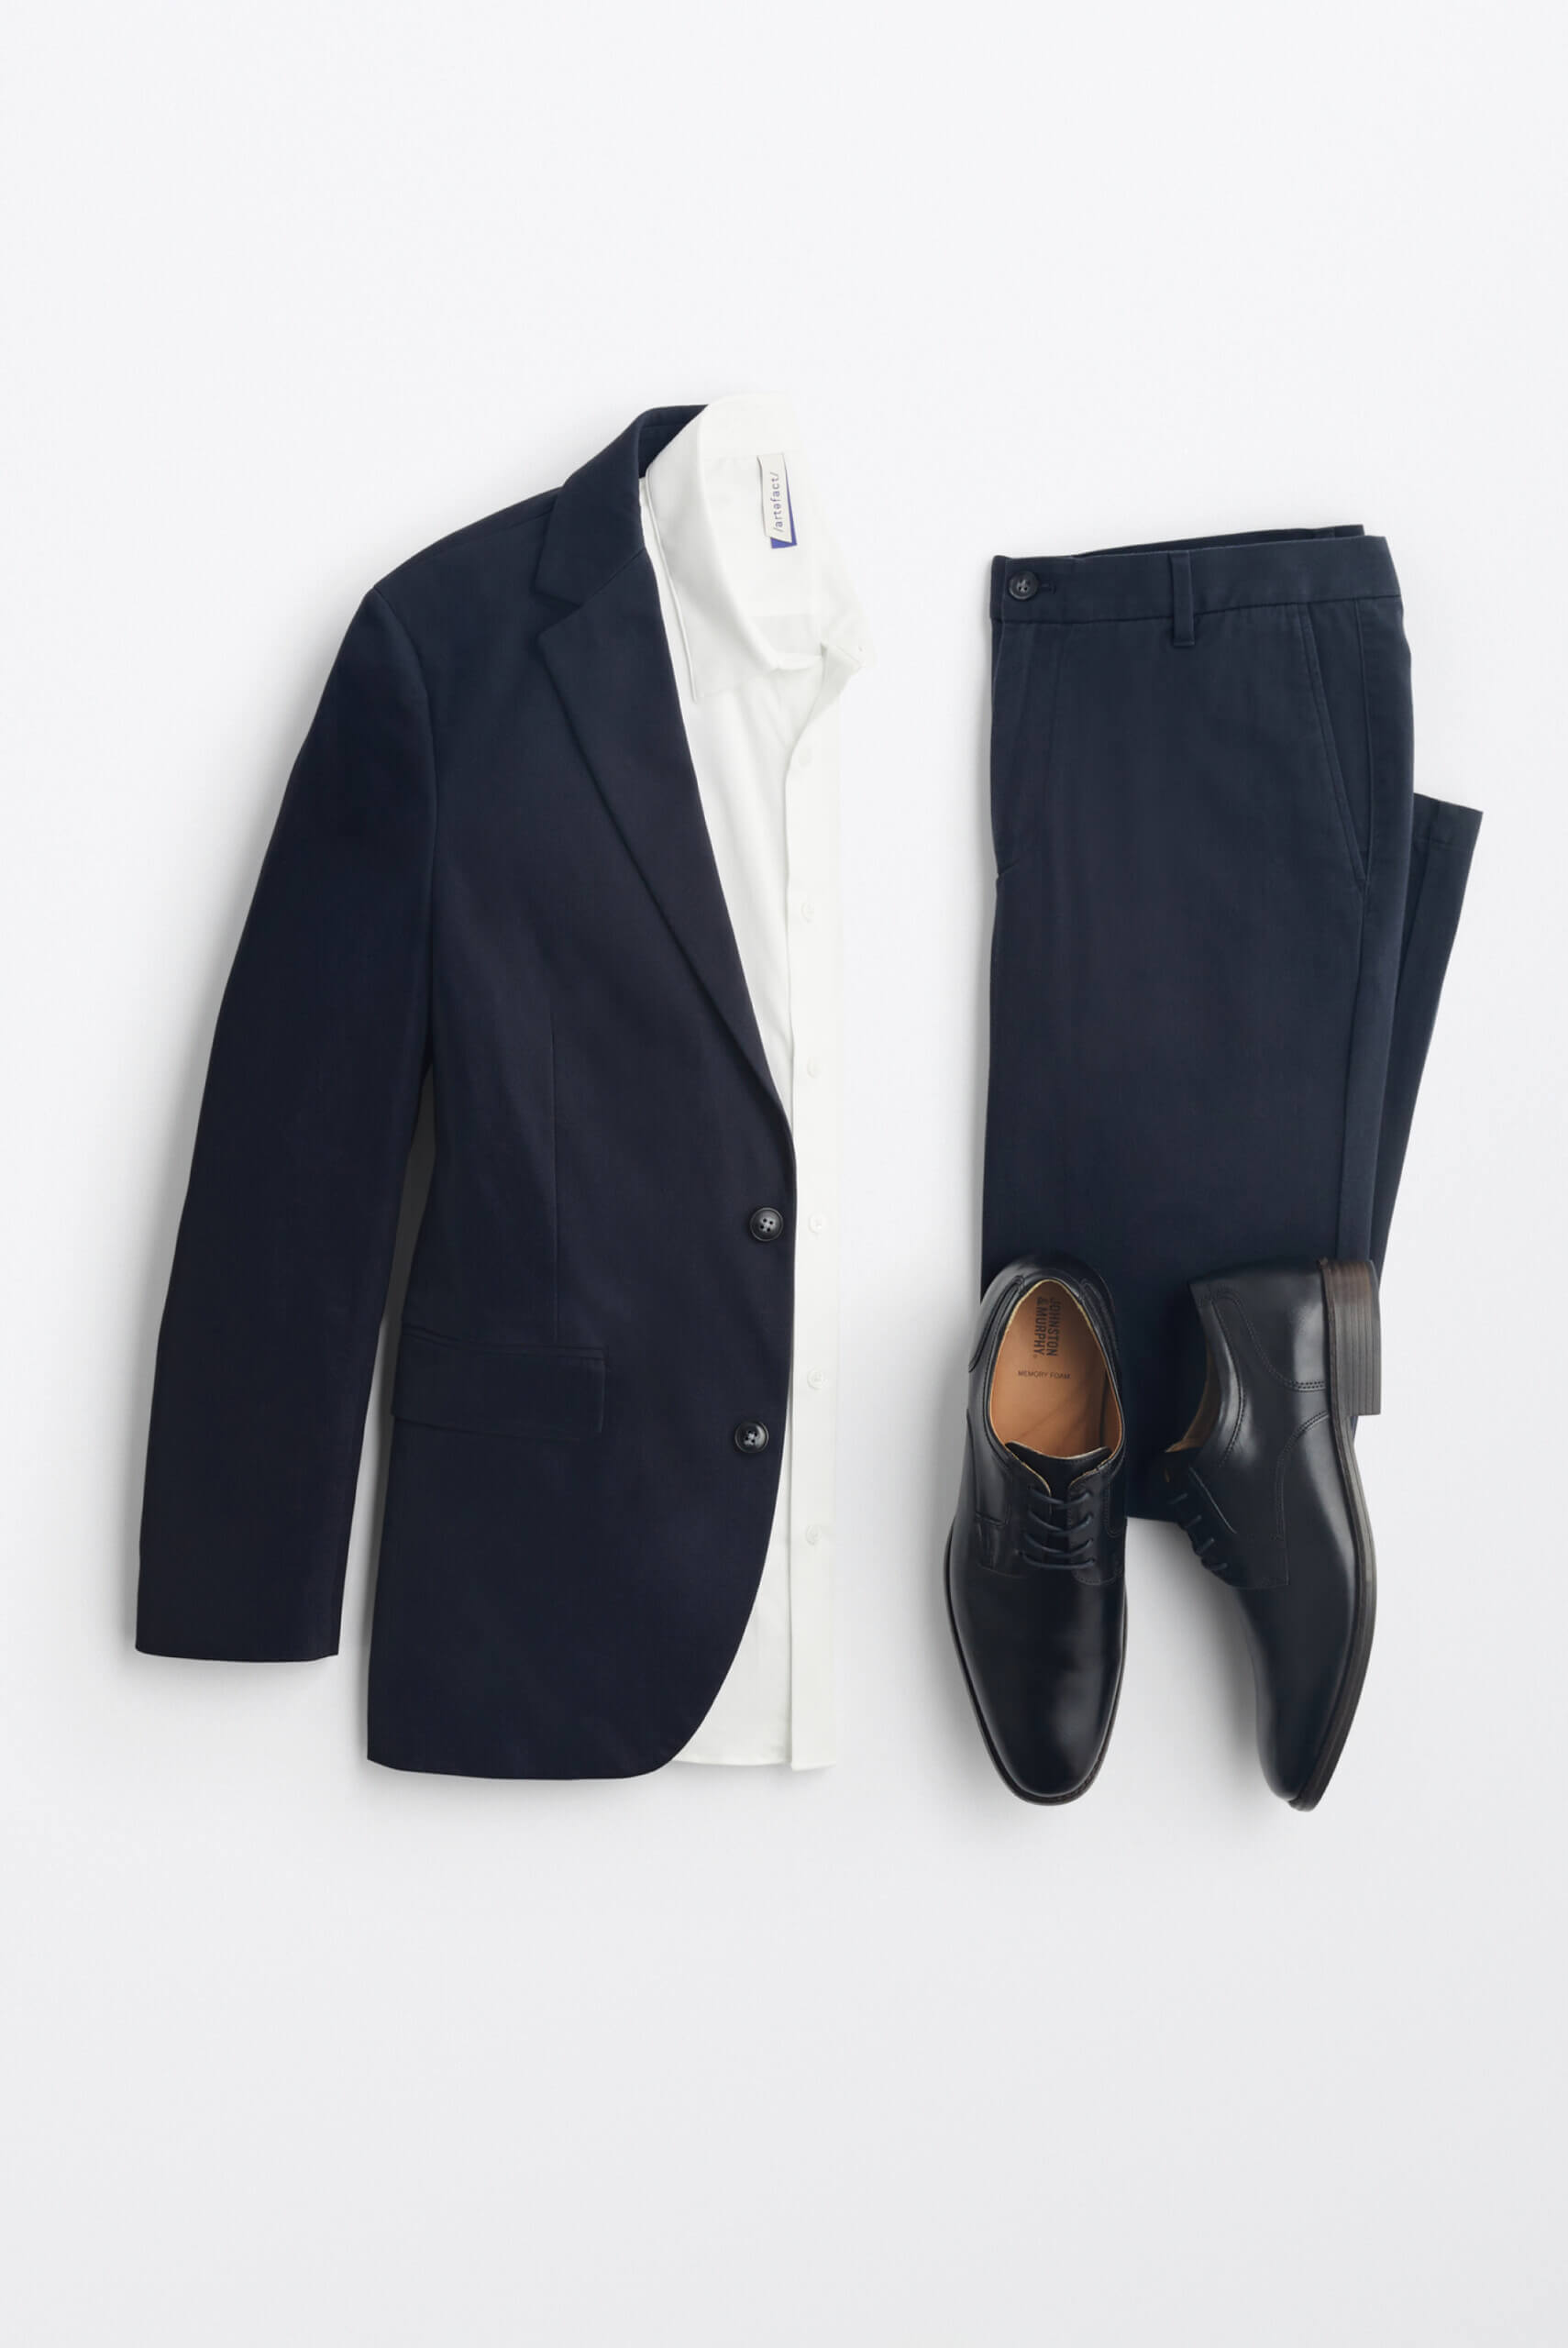 indoor graduation outfit formal ceremony for men